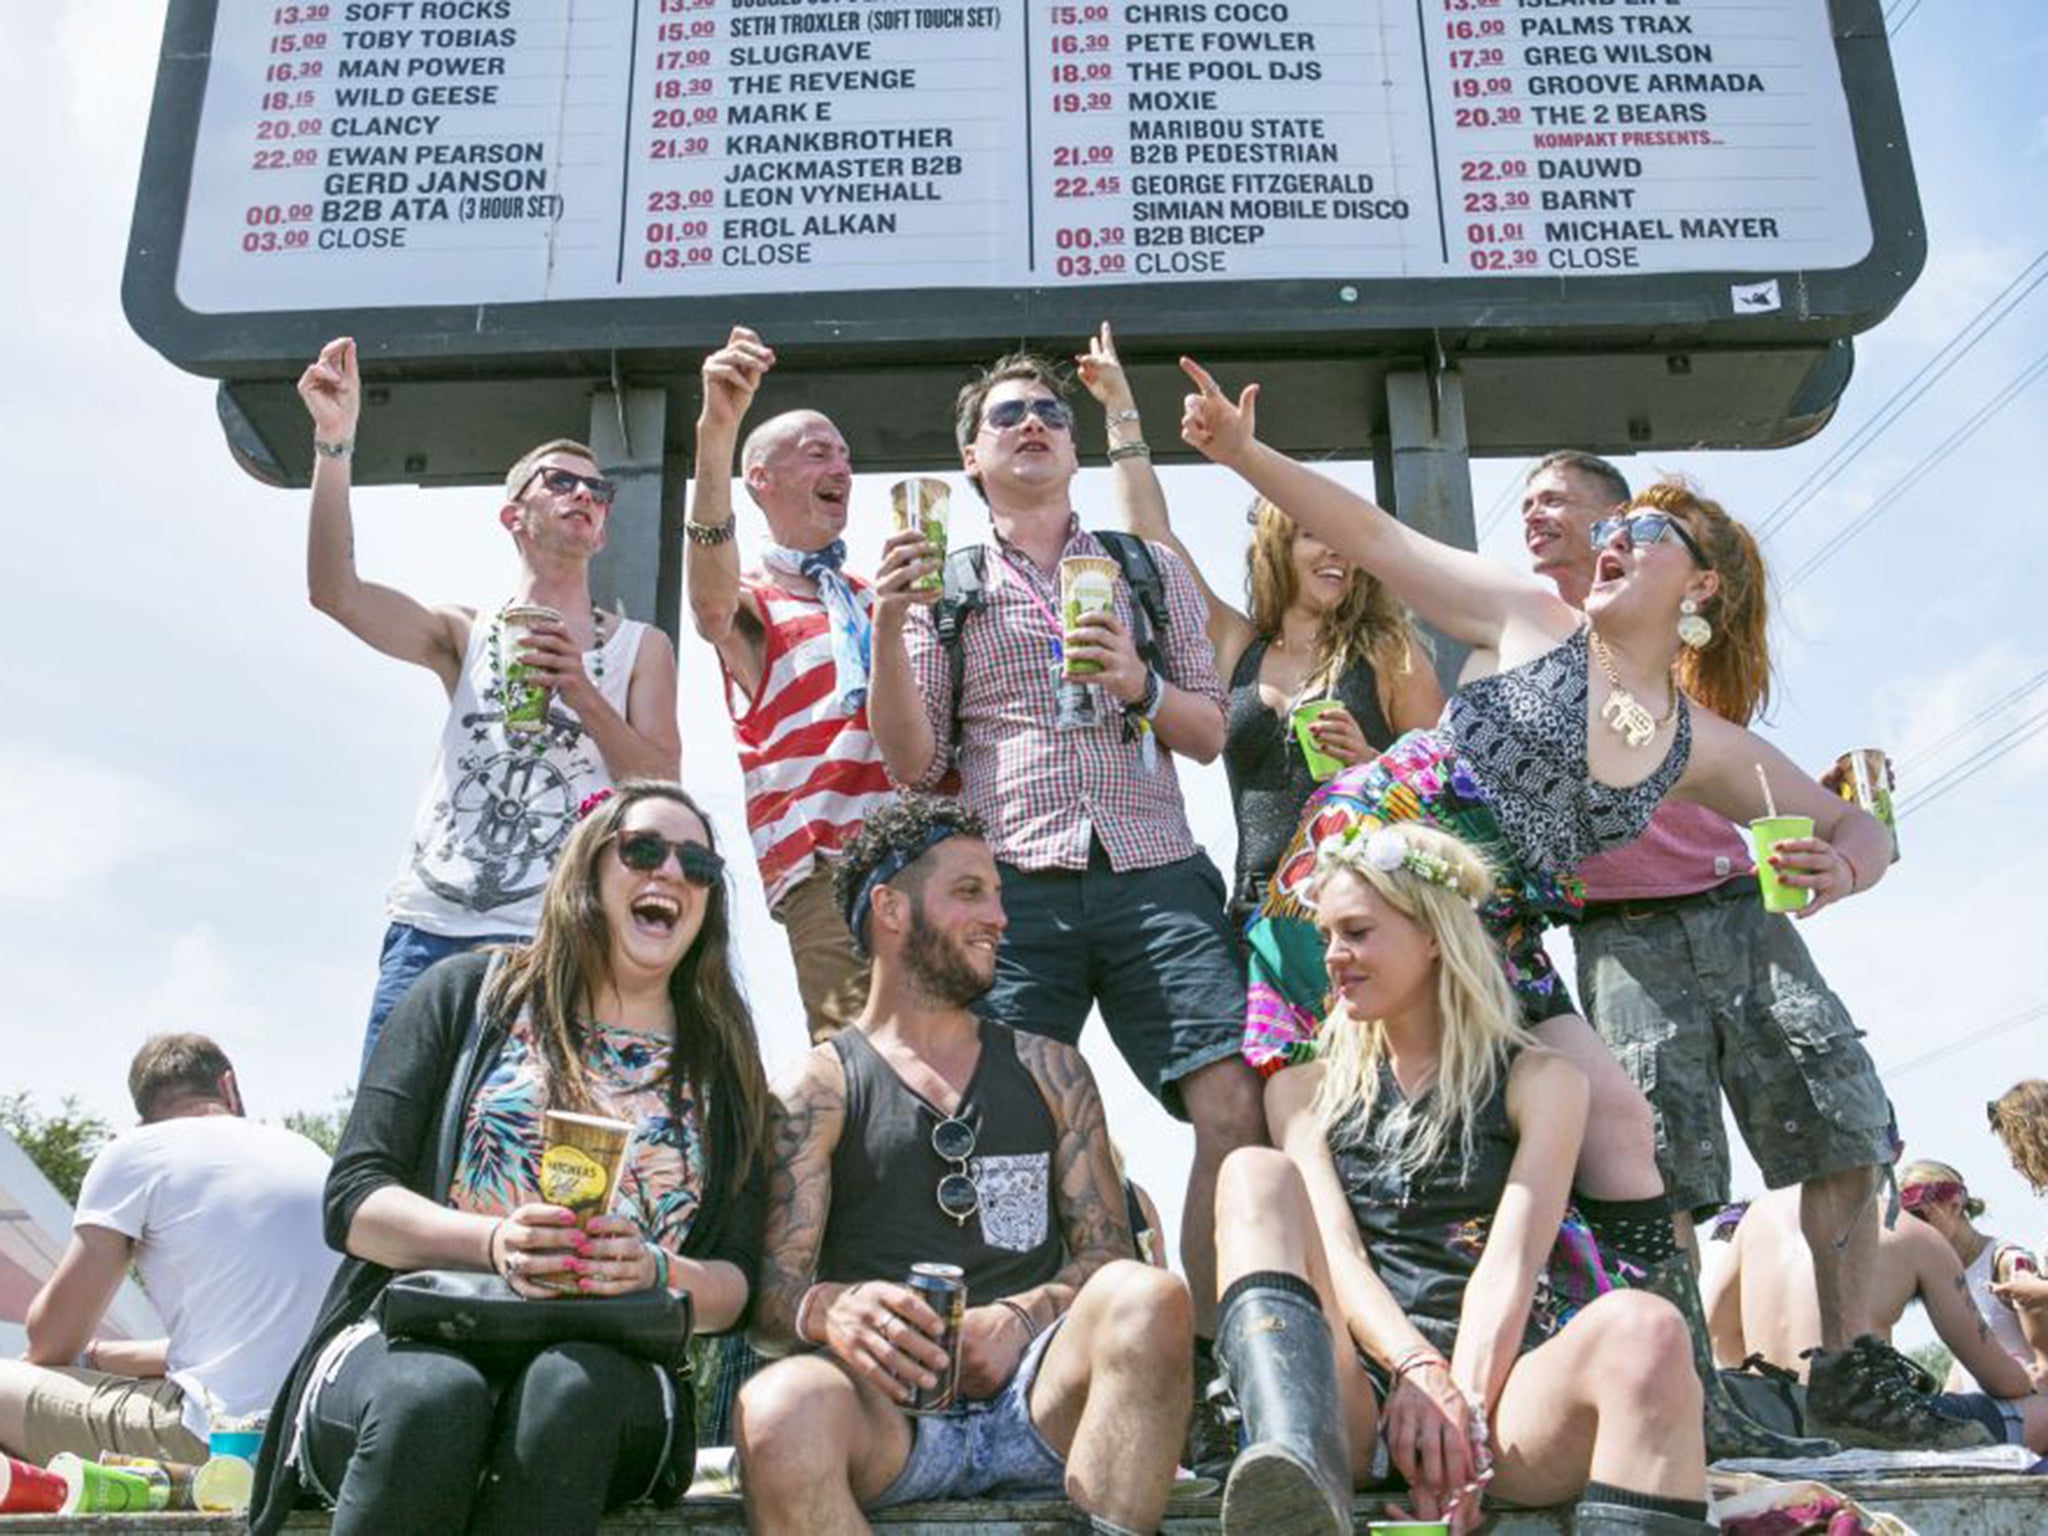 The latest forecast suggests Glastonbury-goers will be dancing in the sunshine, but fortunes might change